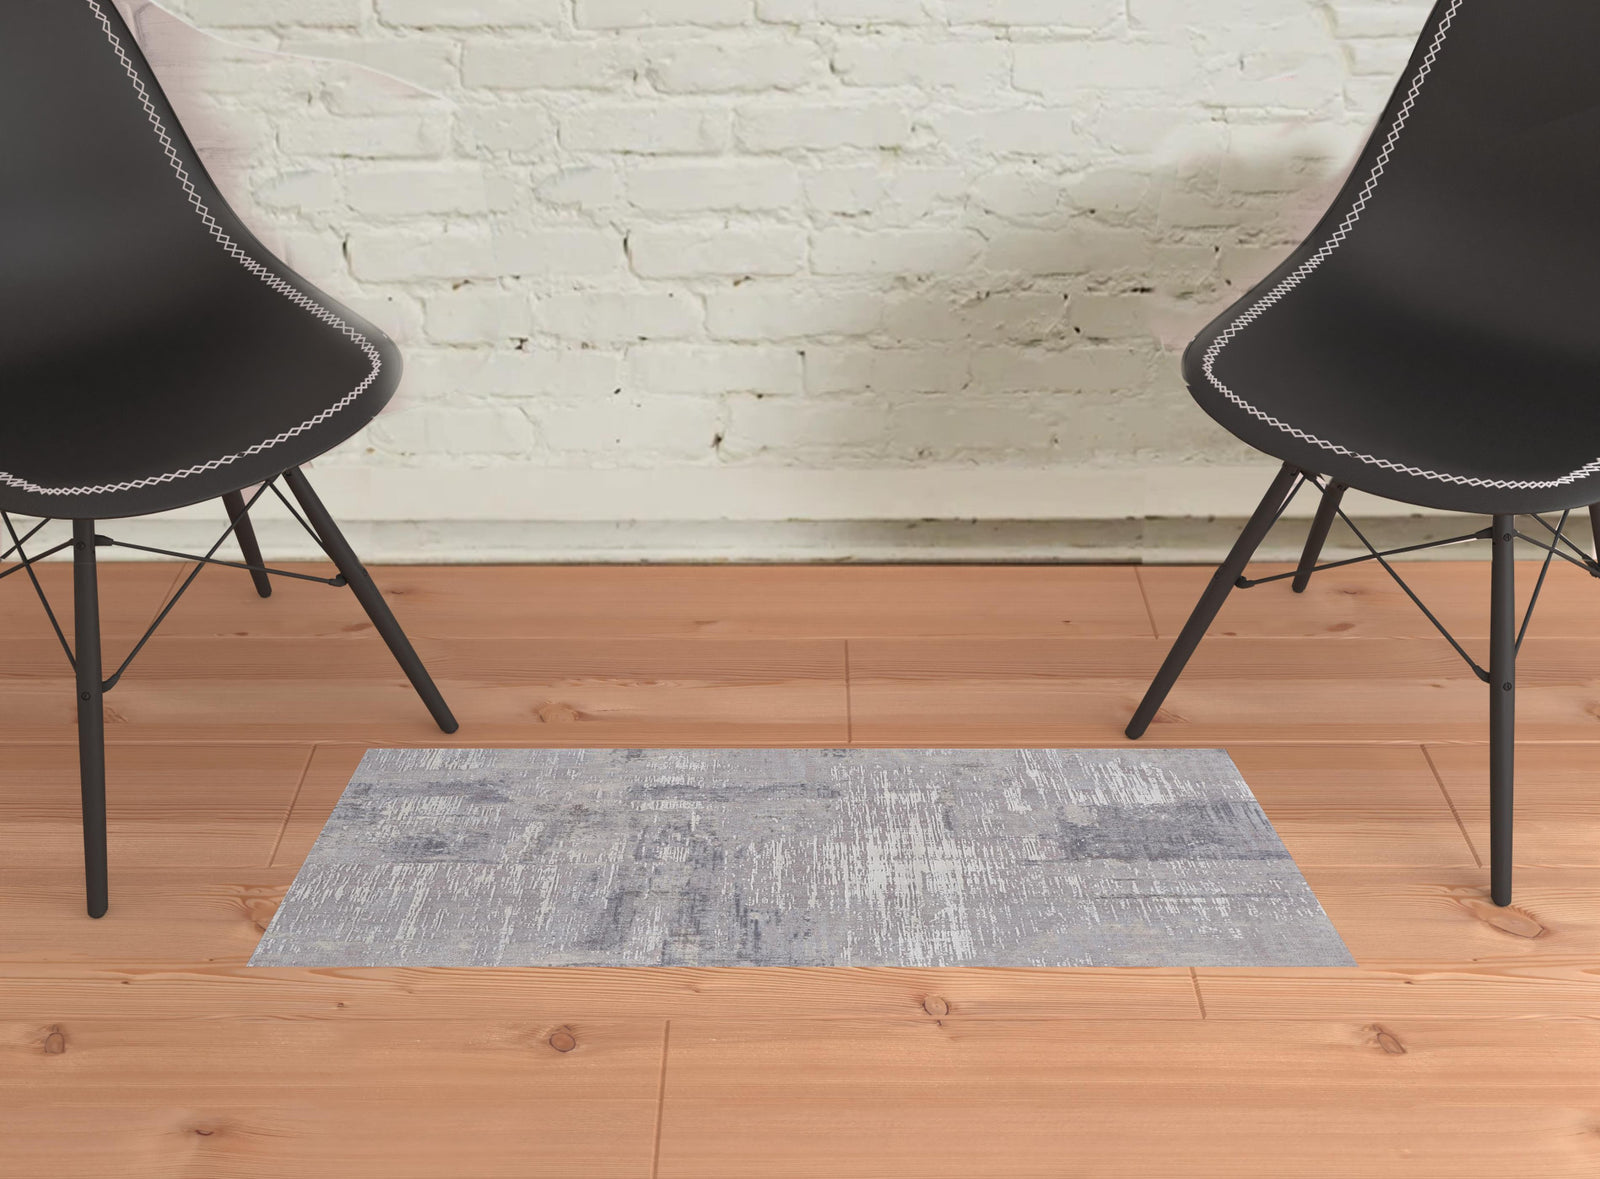 4' X 6' Taupe Tan And Blue Abstract Power Loom Distressed Stain Resistant Area Rug